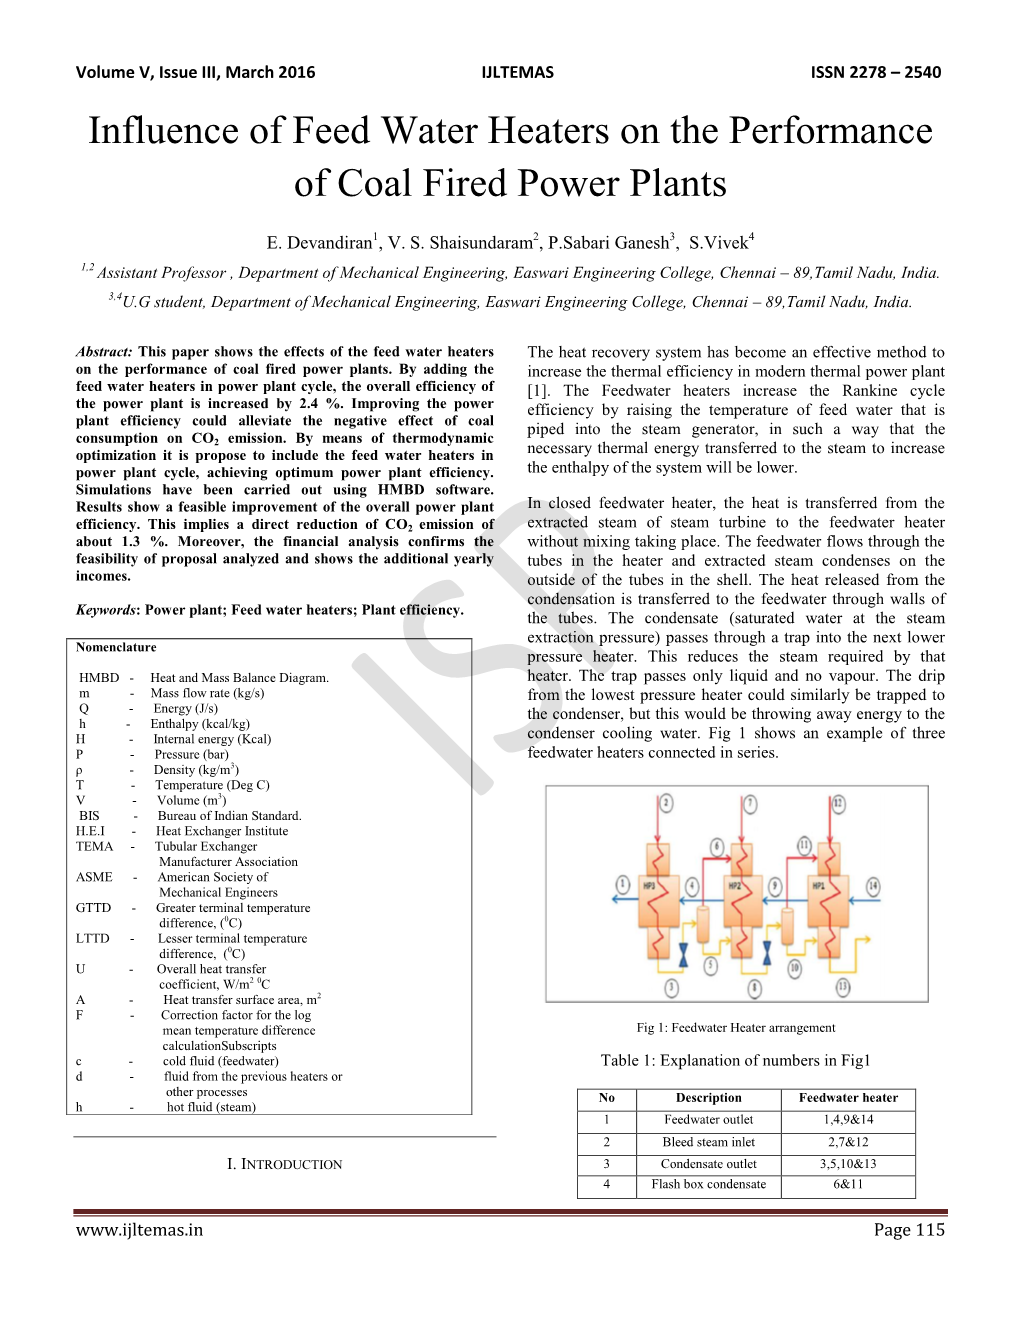 Influence of Feed Water Heaters on the Performance of Coal Fired Power Plants